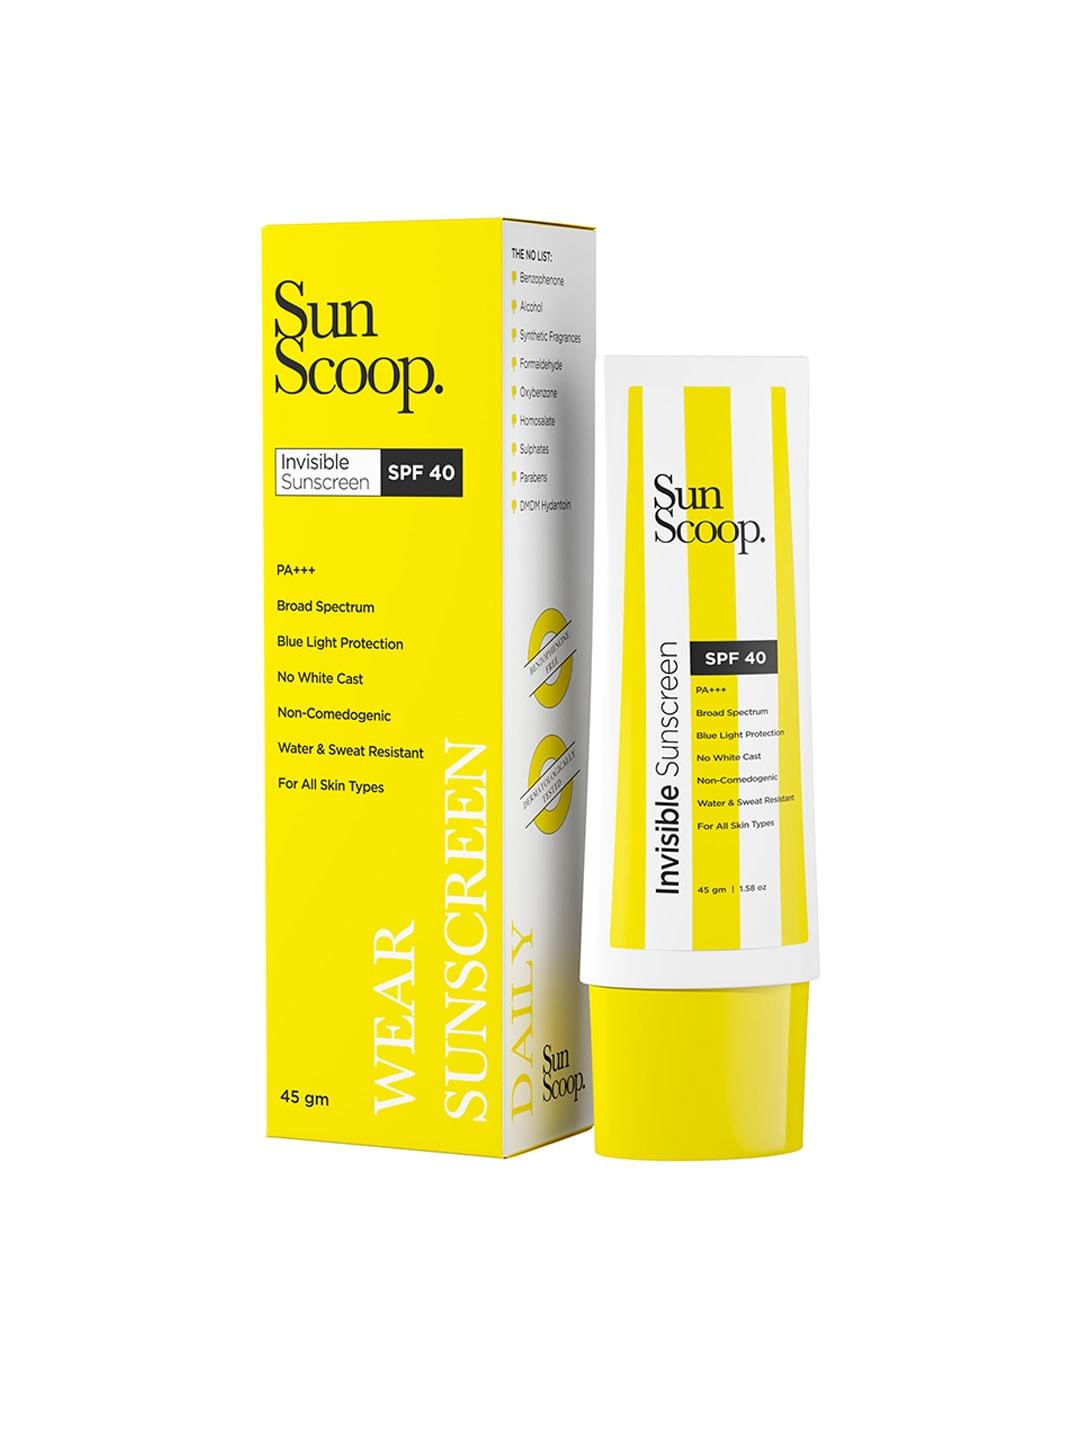 sunscoop spf 40 pa+++ invisible gel based sunscreen with water & sweat resistant - 45 g